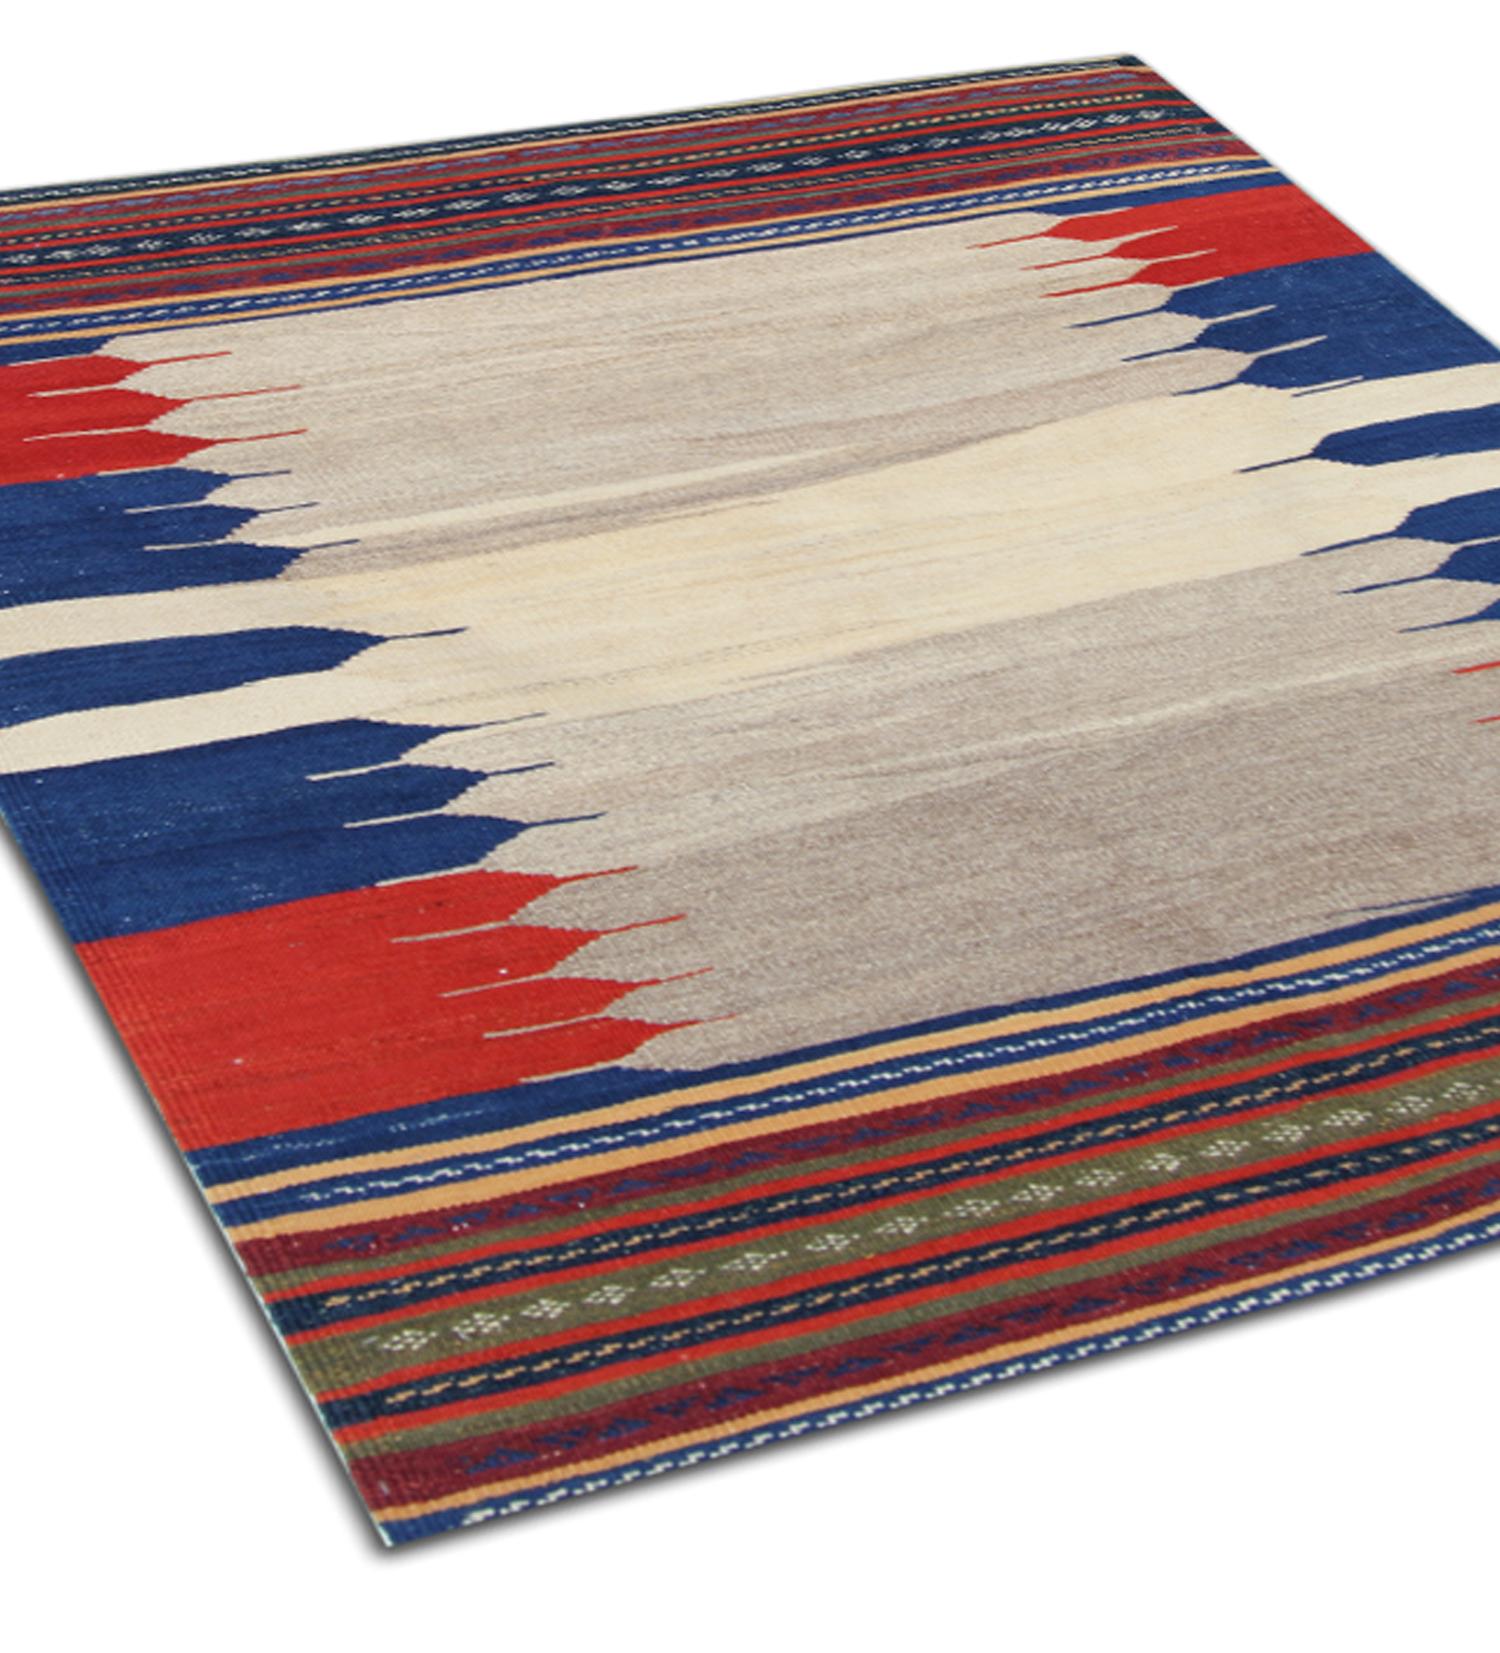 This vintage oriental kilim is a great example of Minimalist kilims woven in the 1940s. It has been handwoven with a simple colour palette including colours red, blue and ivory. With a simple block colour/ striped design. Constructed using hand-spun